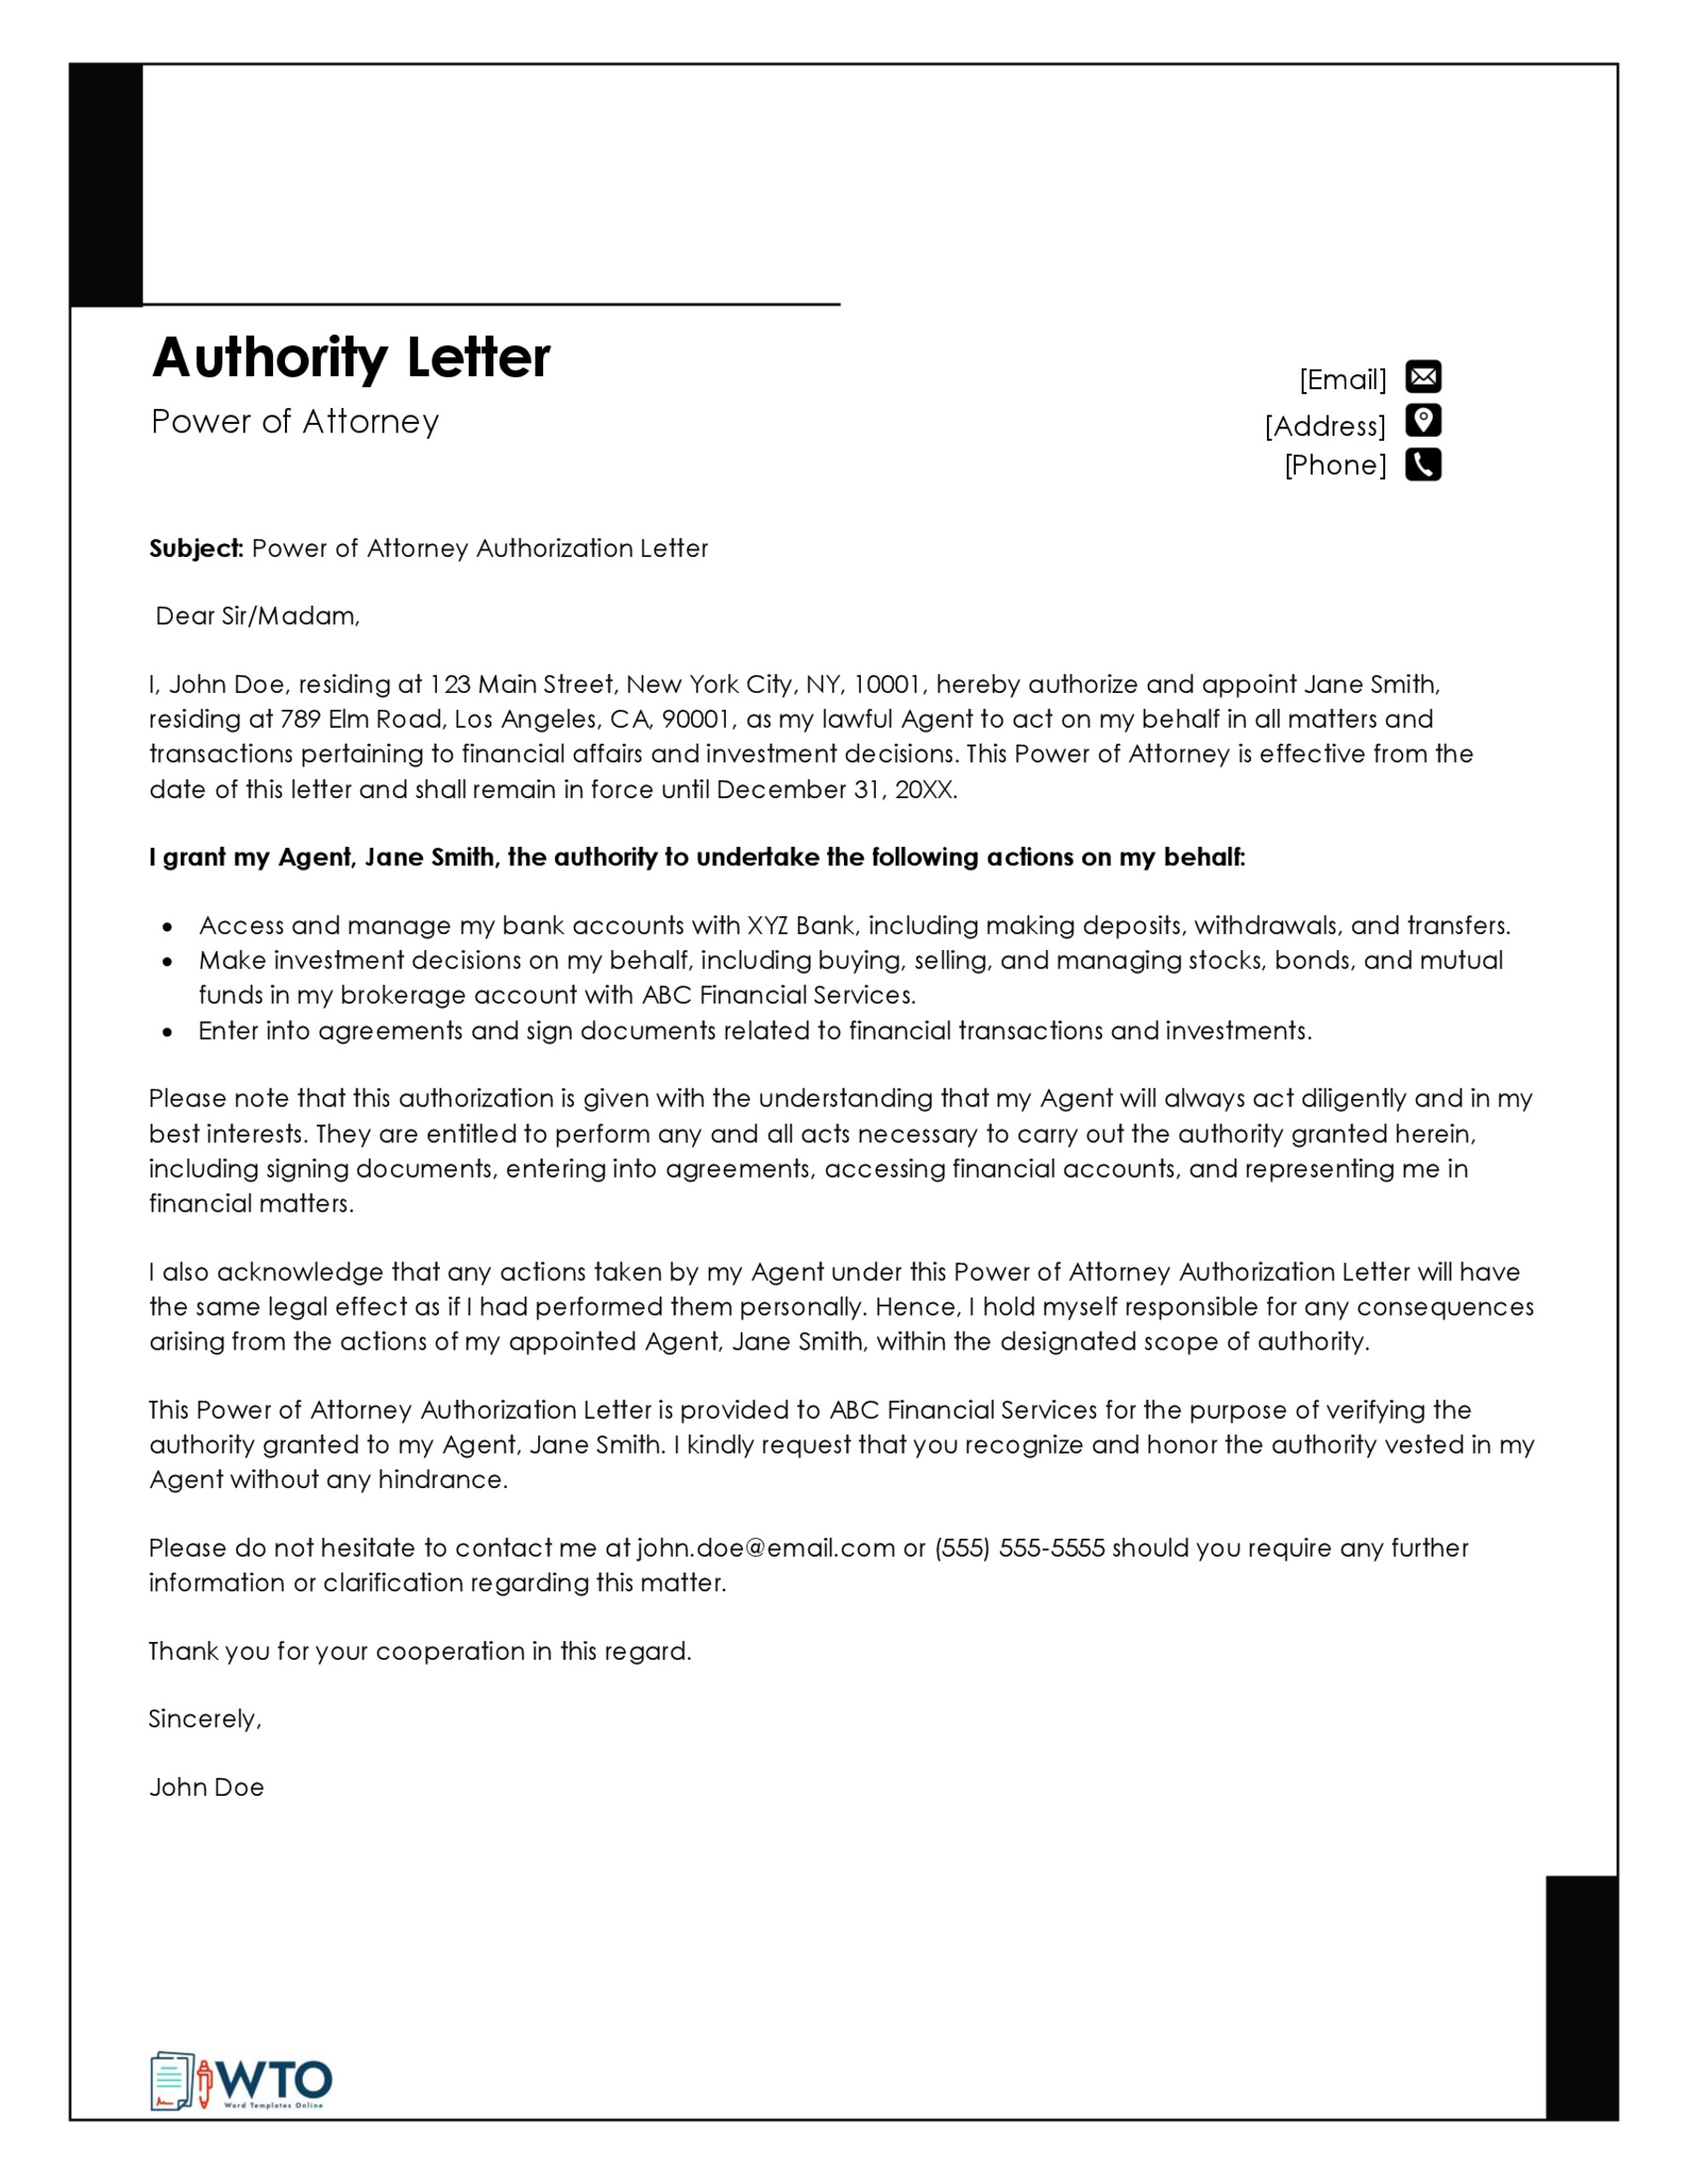 Editable Power of Attorney Authorization Letter Sample 02 for Word